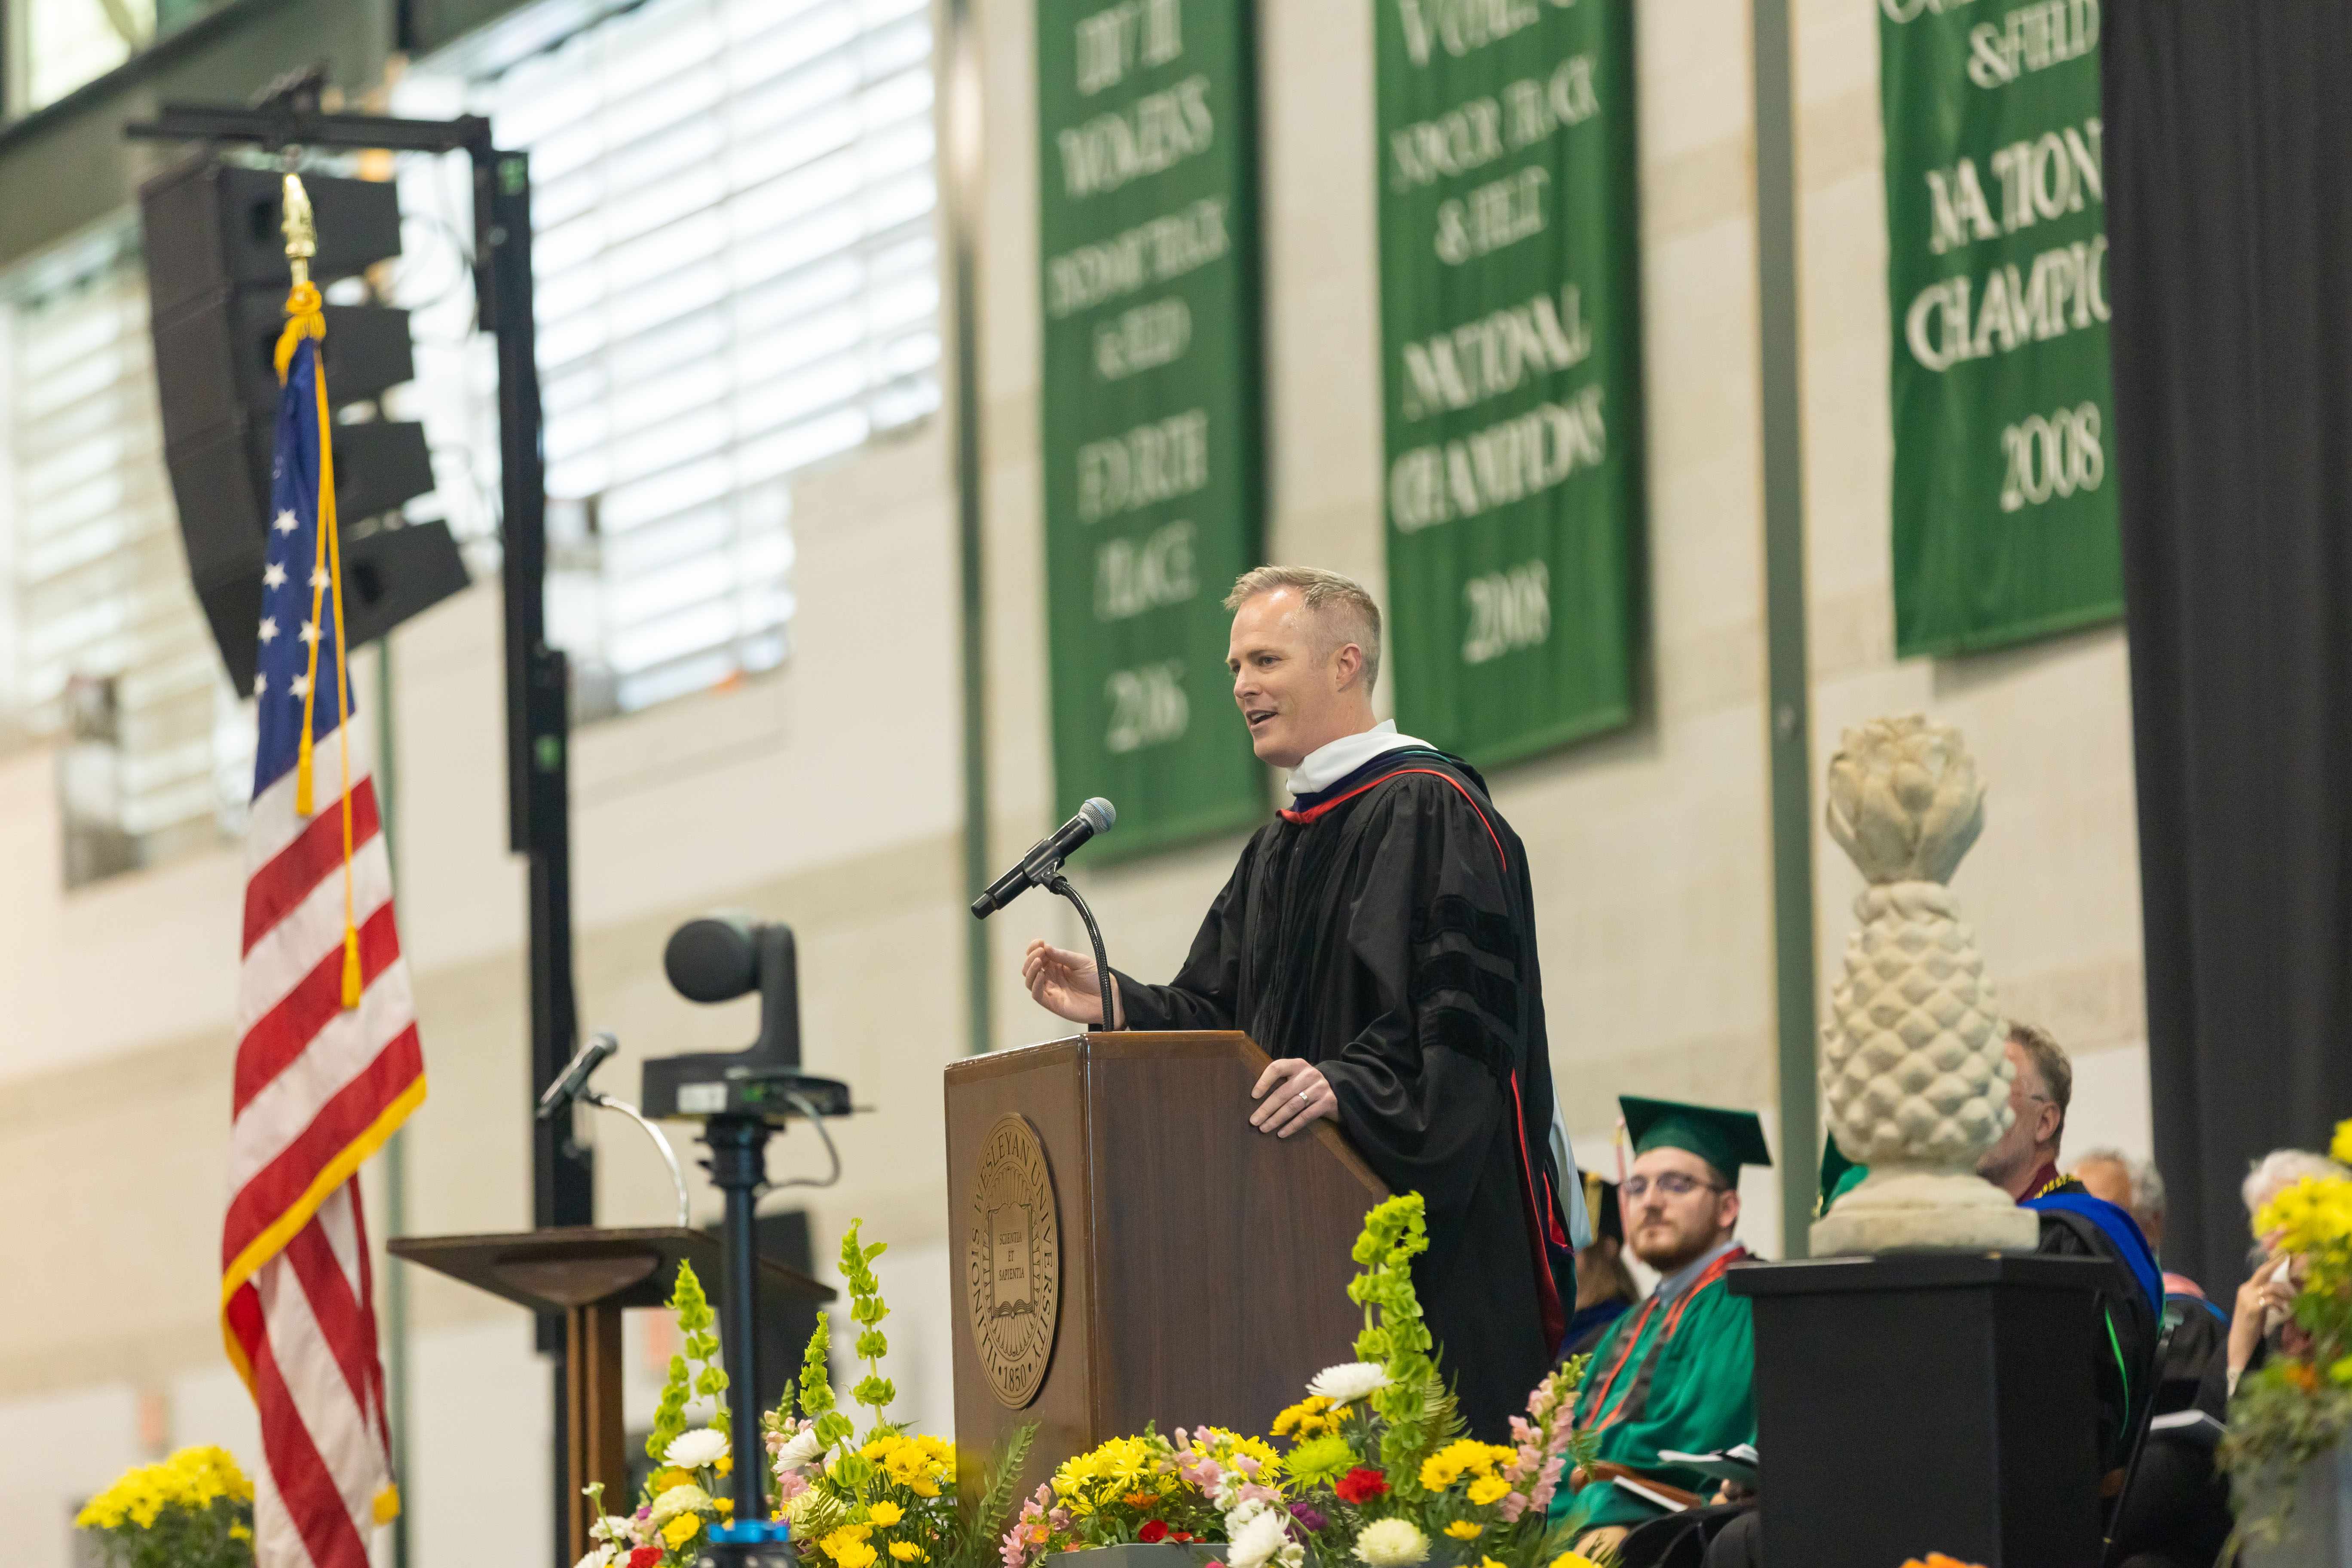 Burke Nihill speaking at podium during Illinois Wesleyan commencement ceremony